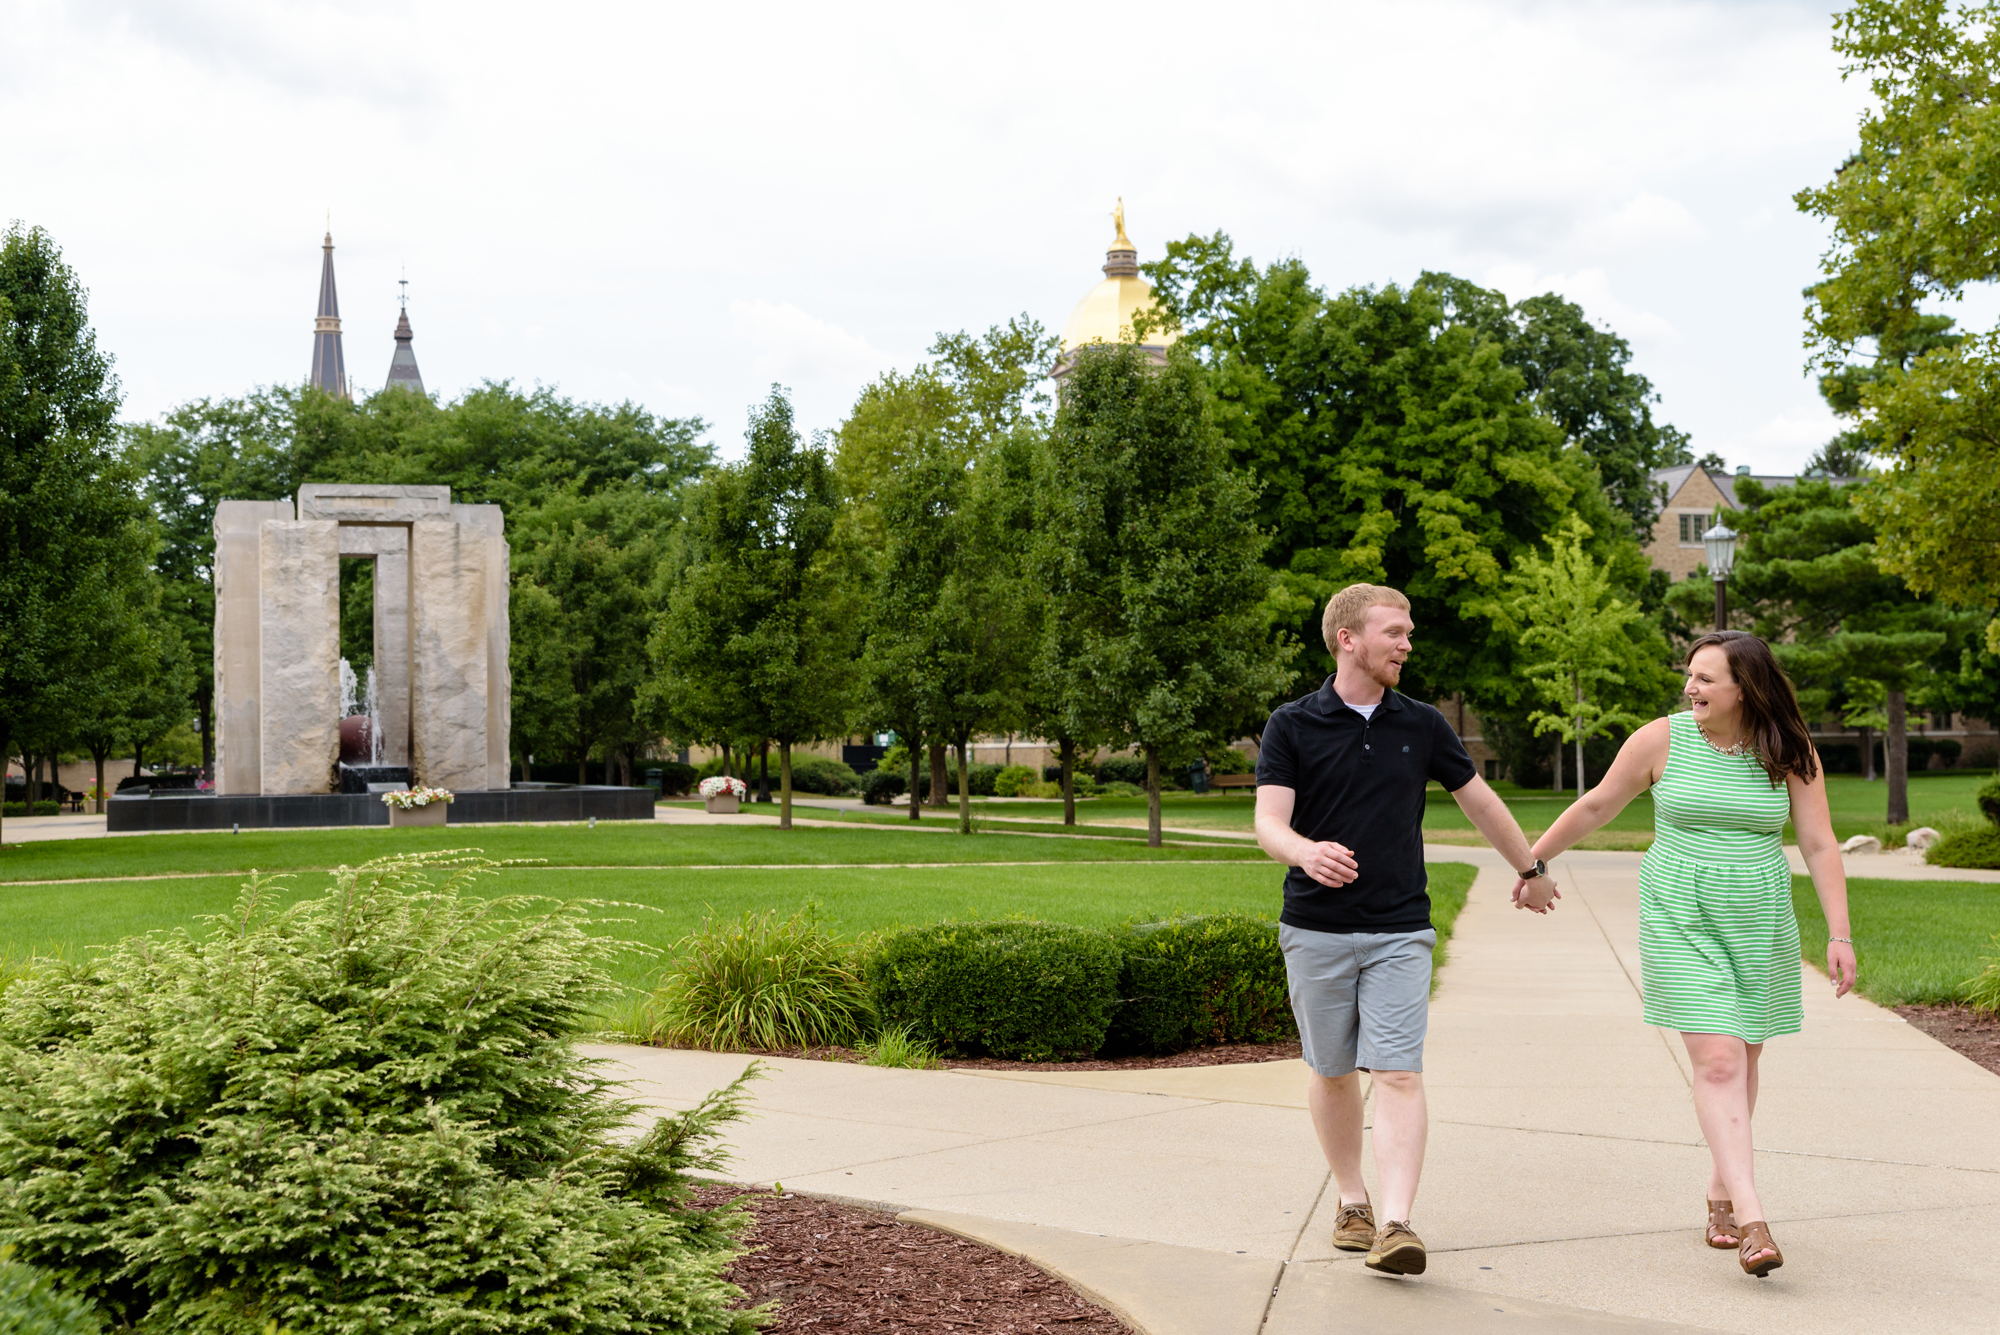 Engaged couple at the Clarke Memorial Fountain with the Basilica and Dome in the background on the campus of the University of Notre Dame